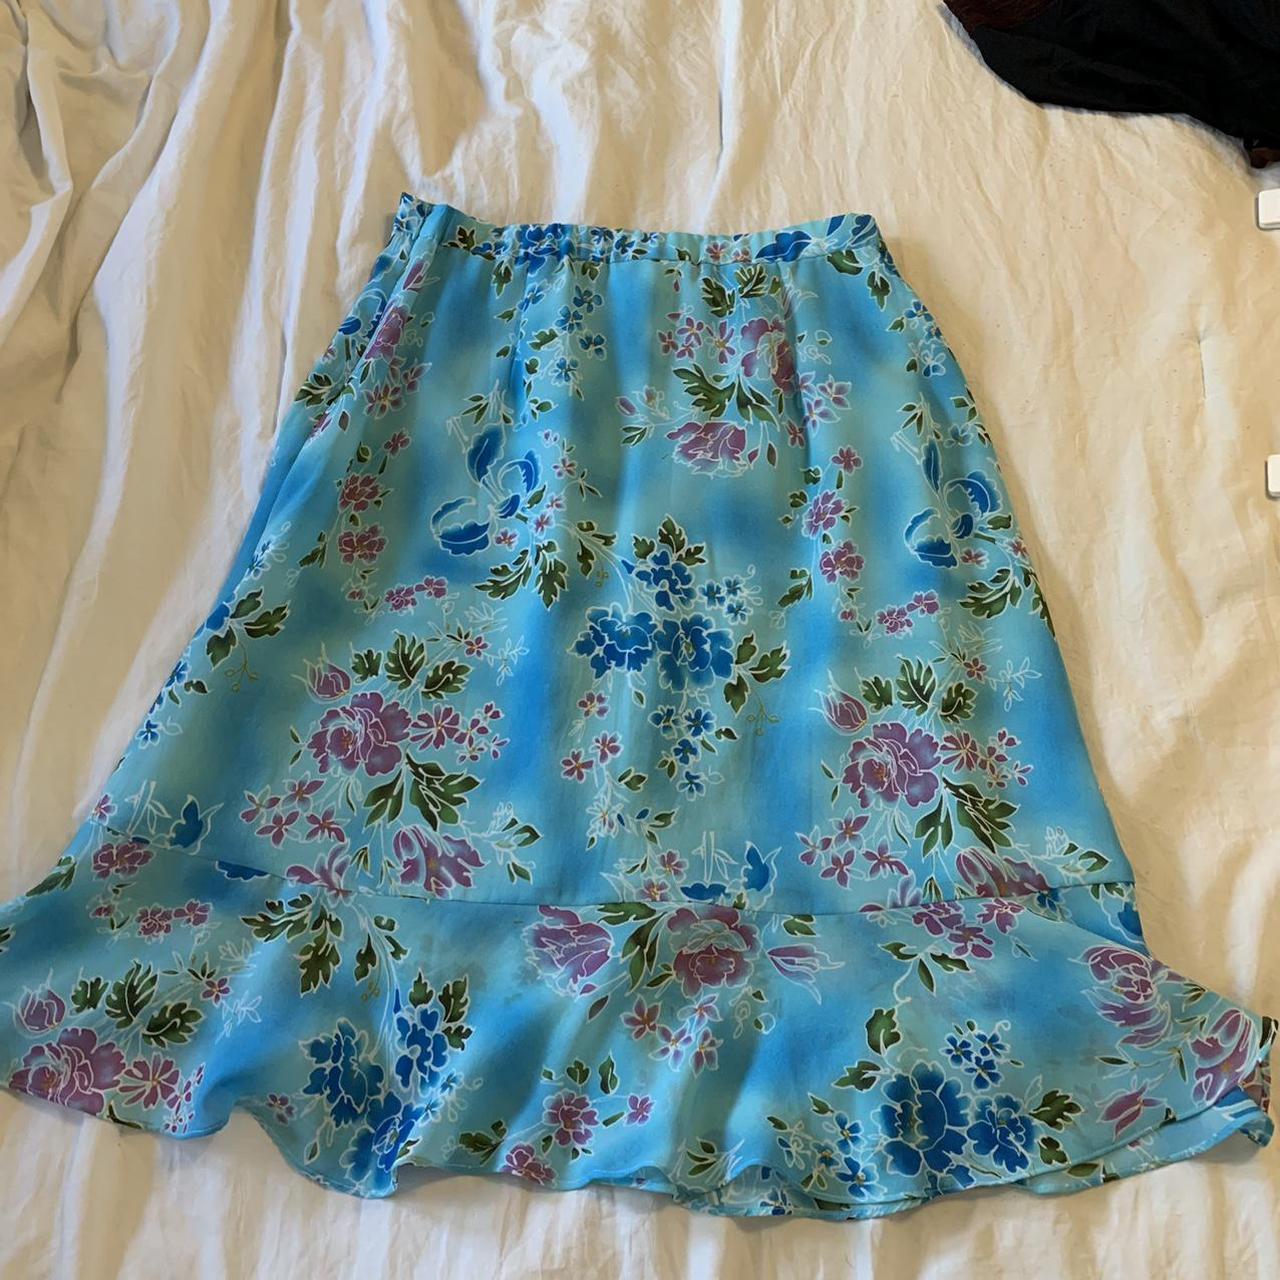 Coldwater Creek Women's Blue and White Skirt | Depop